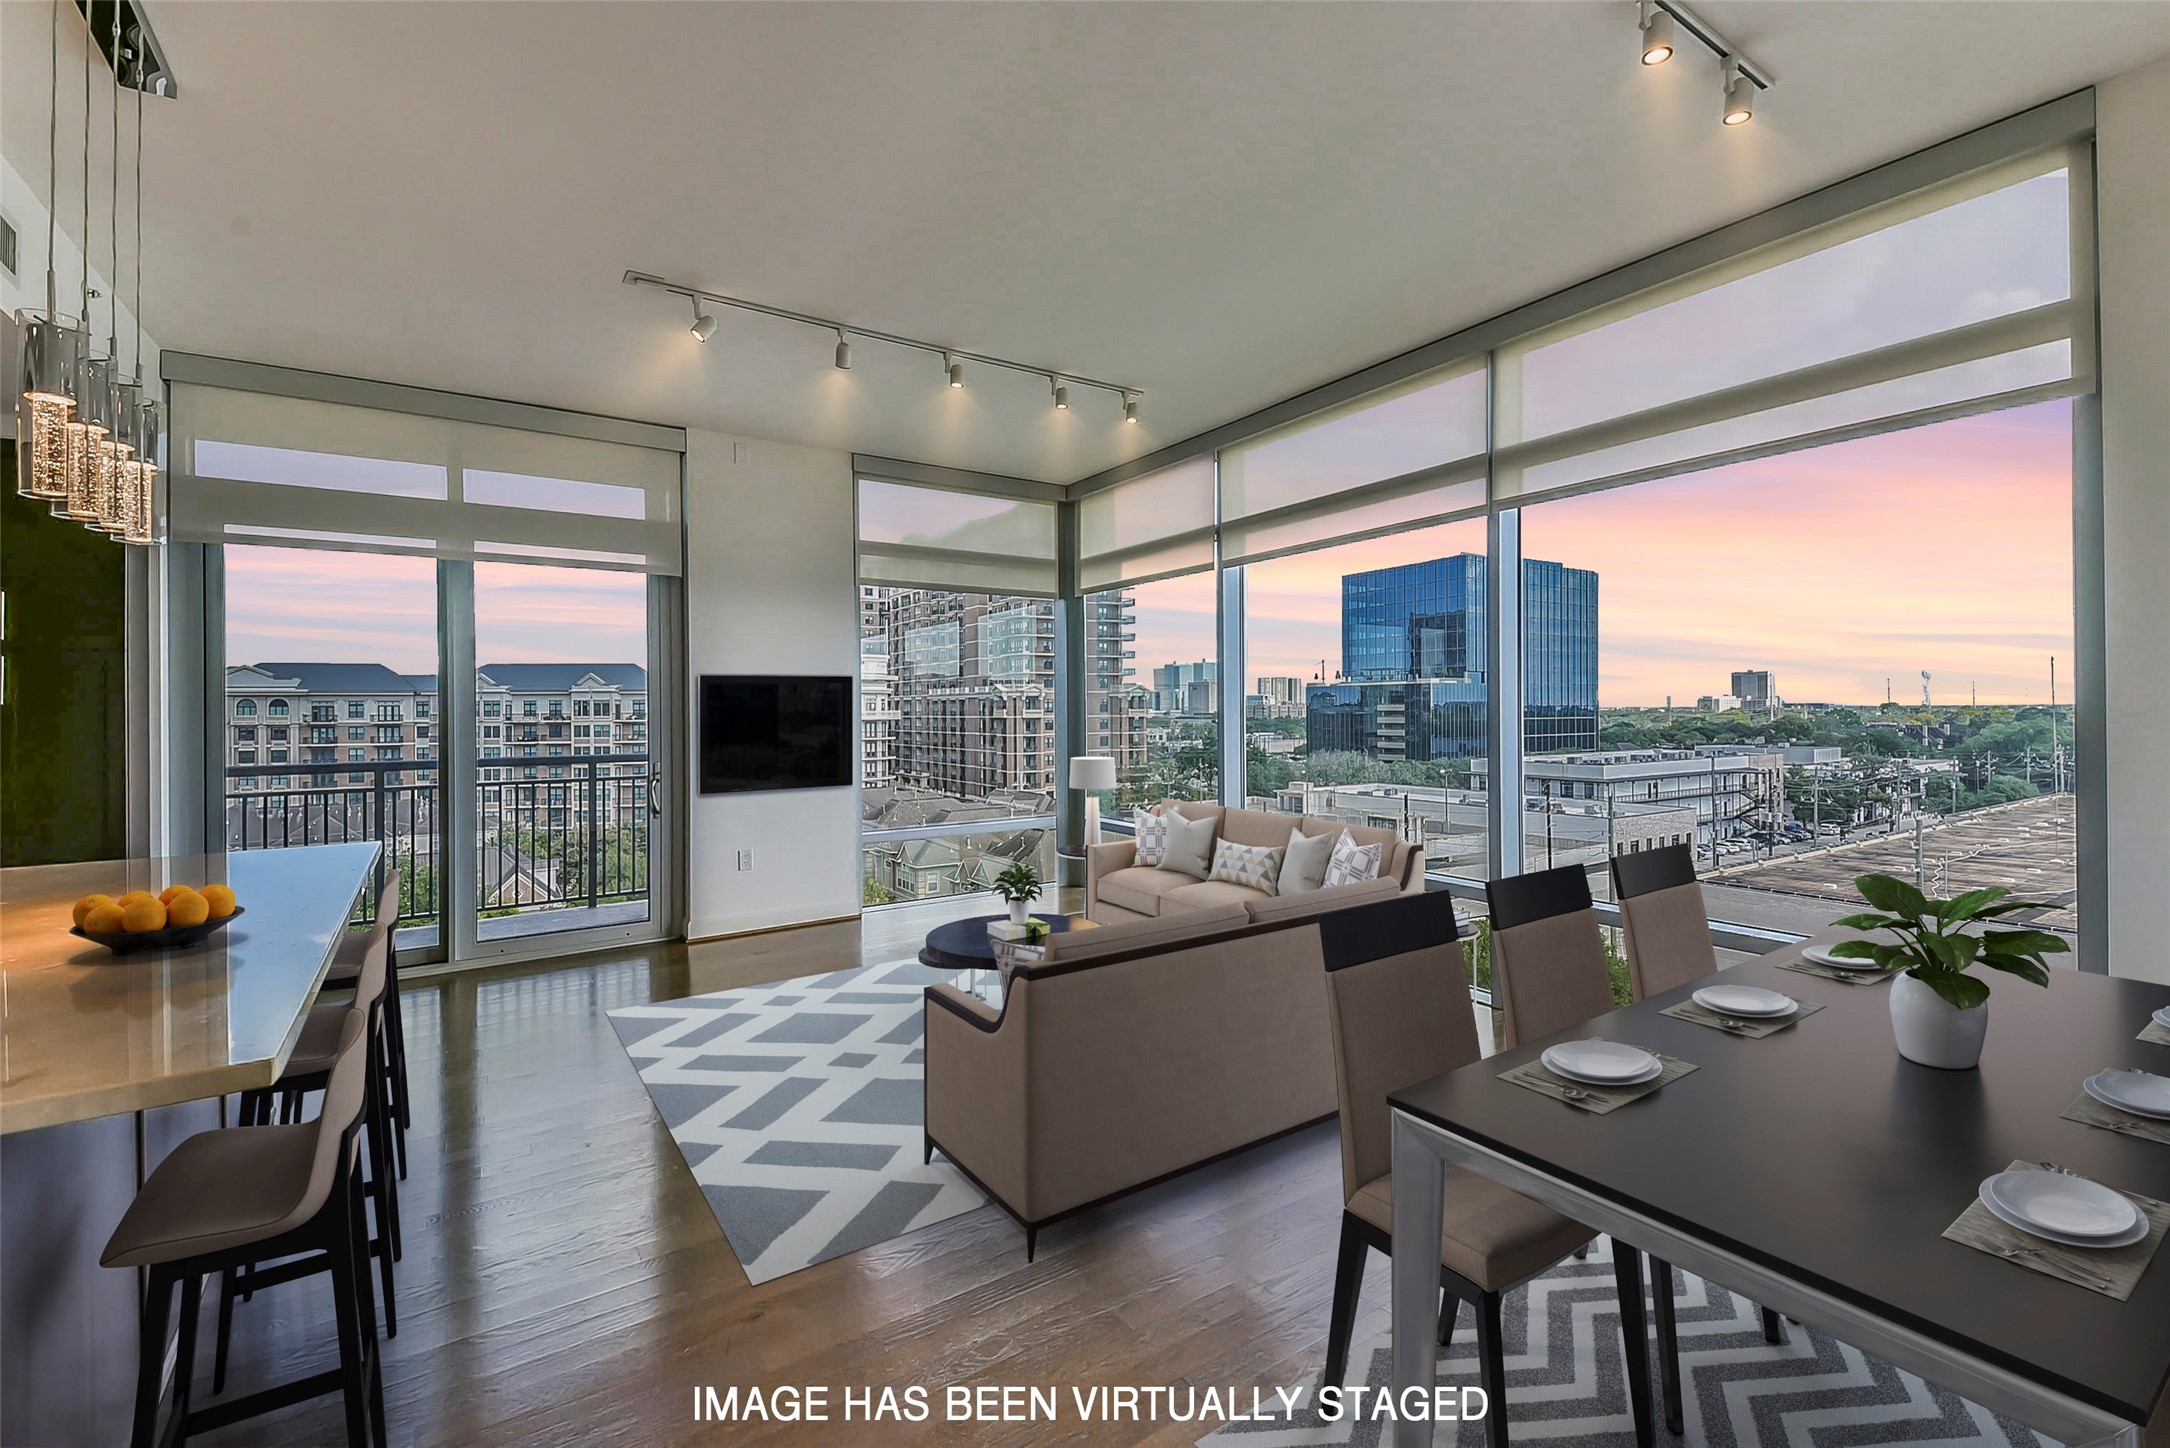 Welcome to elegance and luxury in Highland Tower in Unit 705. Gorgeous dusk views from your floor to ceiling windows.